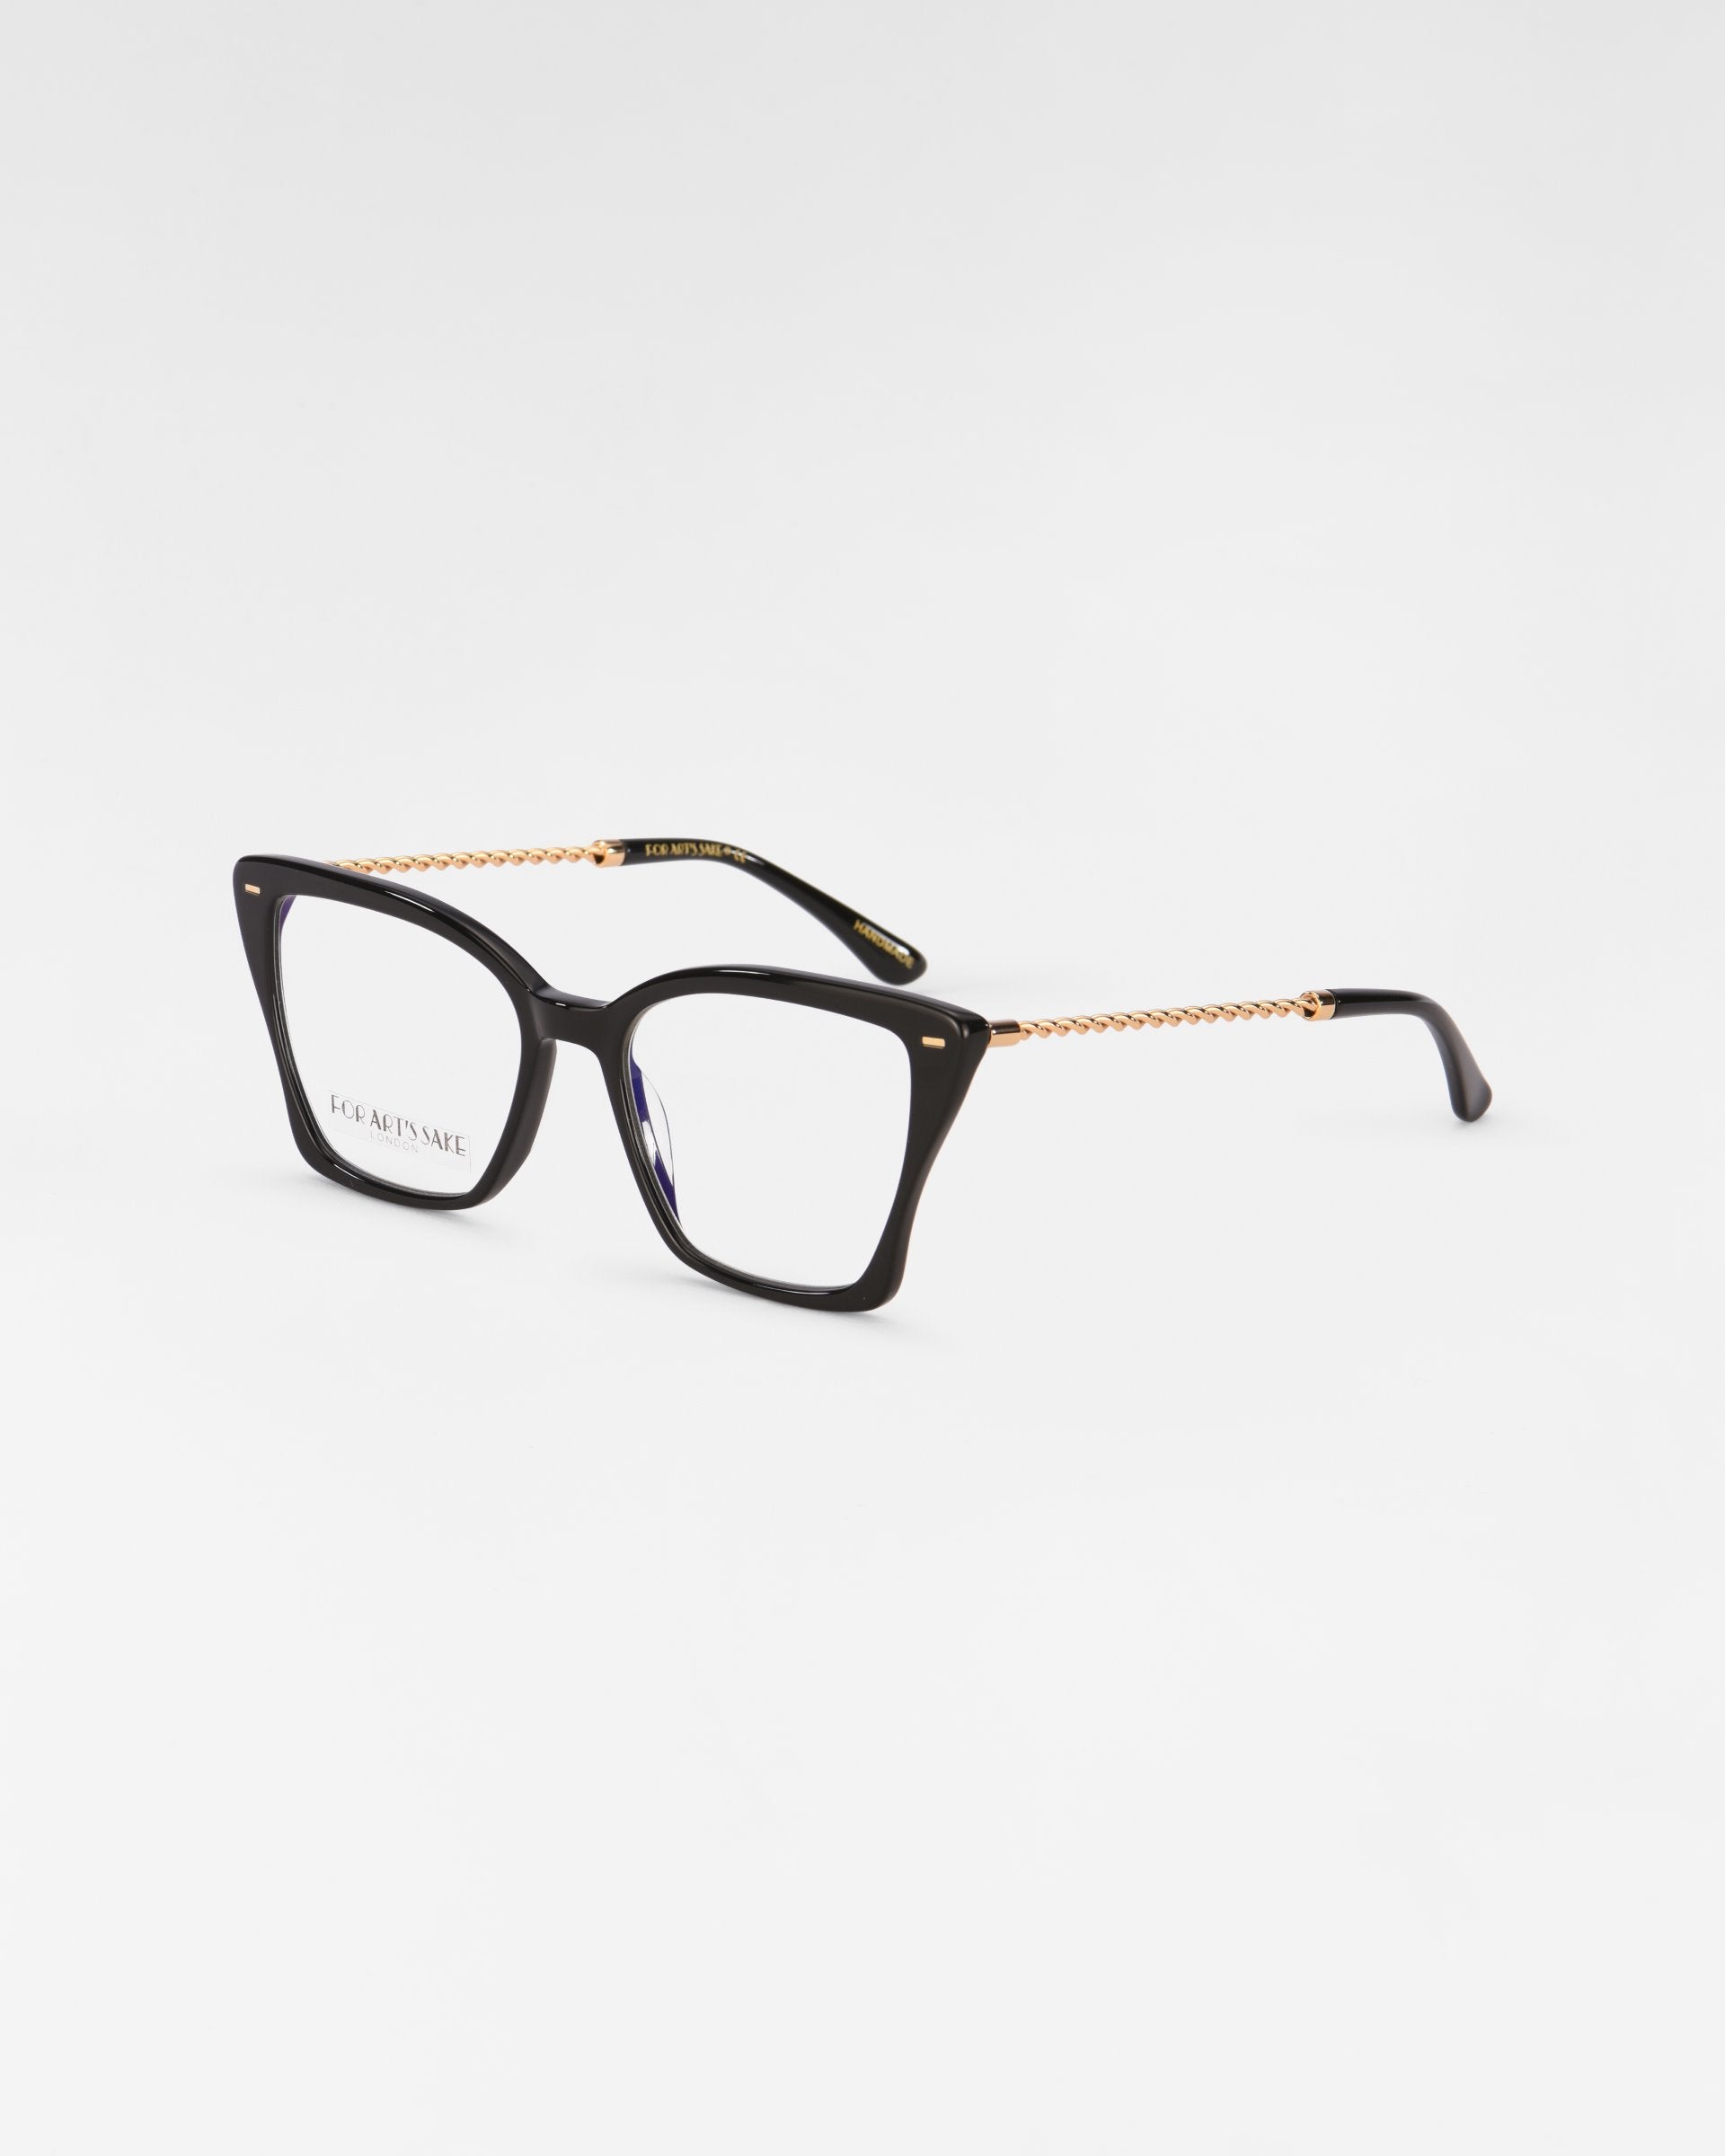 A pair of rectangular Dion eyeglasses with tortoiseshell frames and gold-accented temples featuring intricate chain-like detailing, equipped with a blue light filter, showcased on a plain white background by For Art&#39;s Sake®.